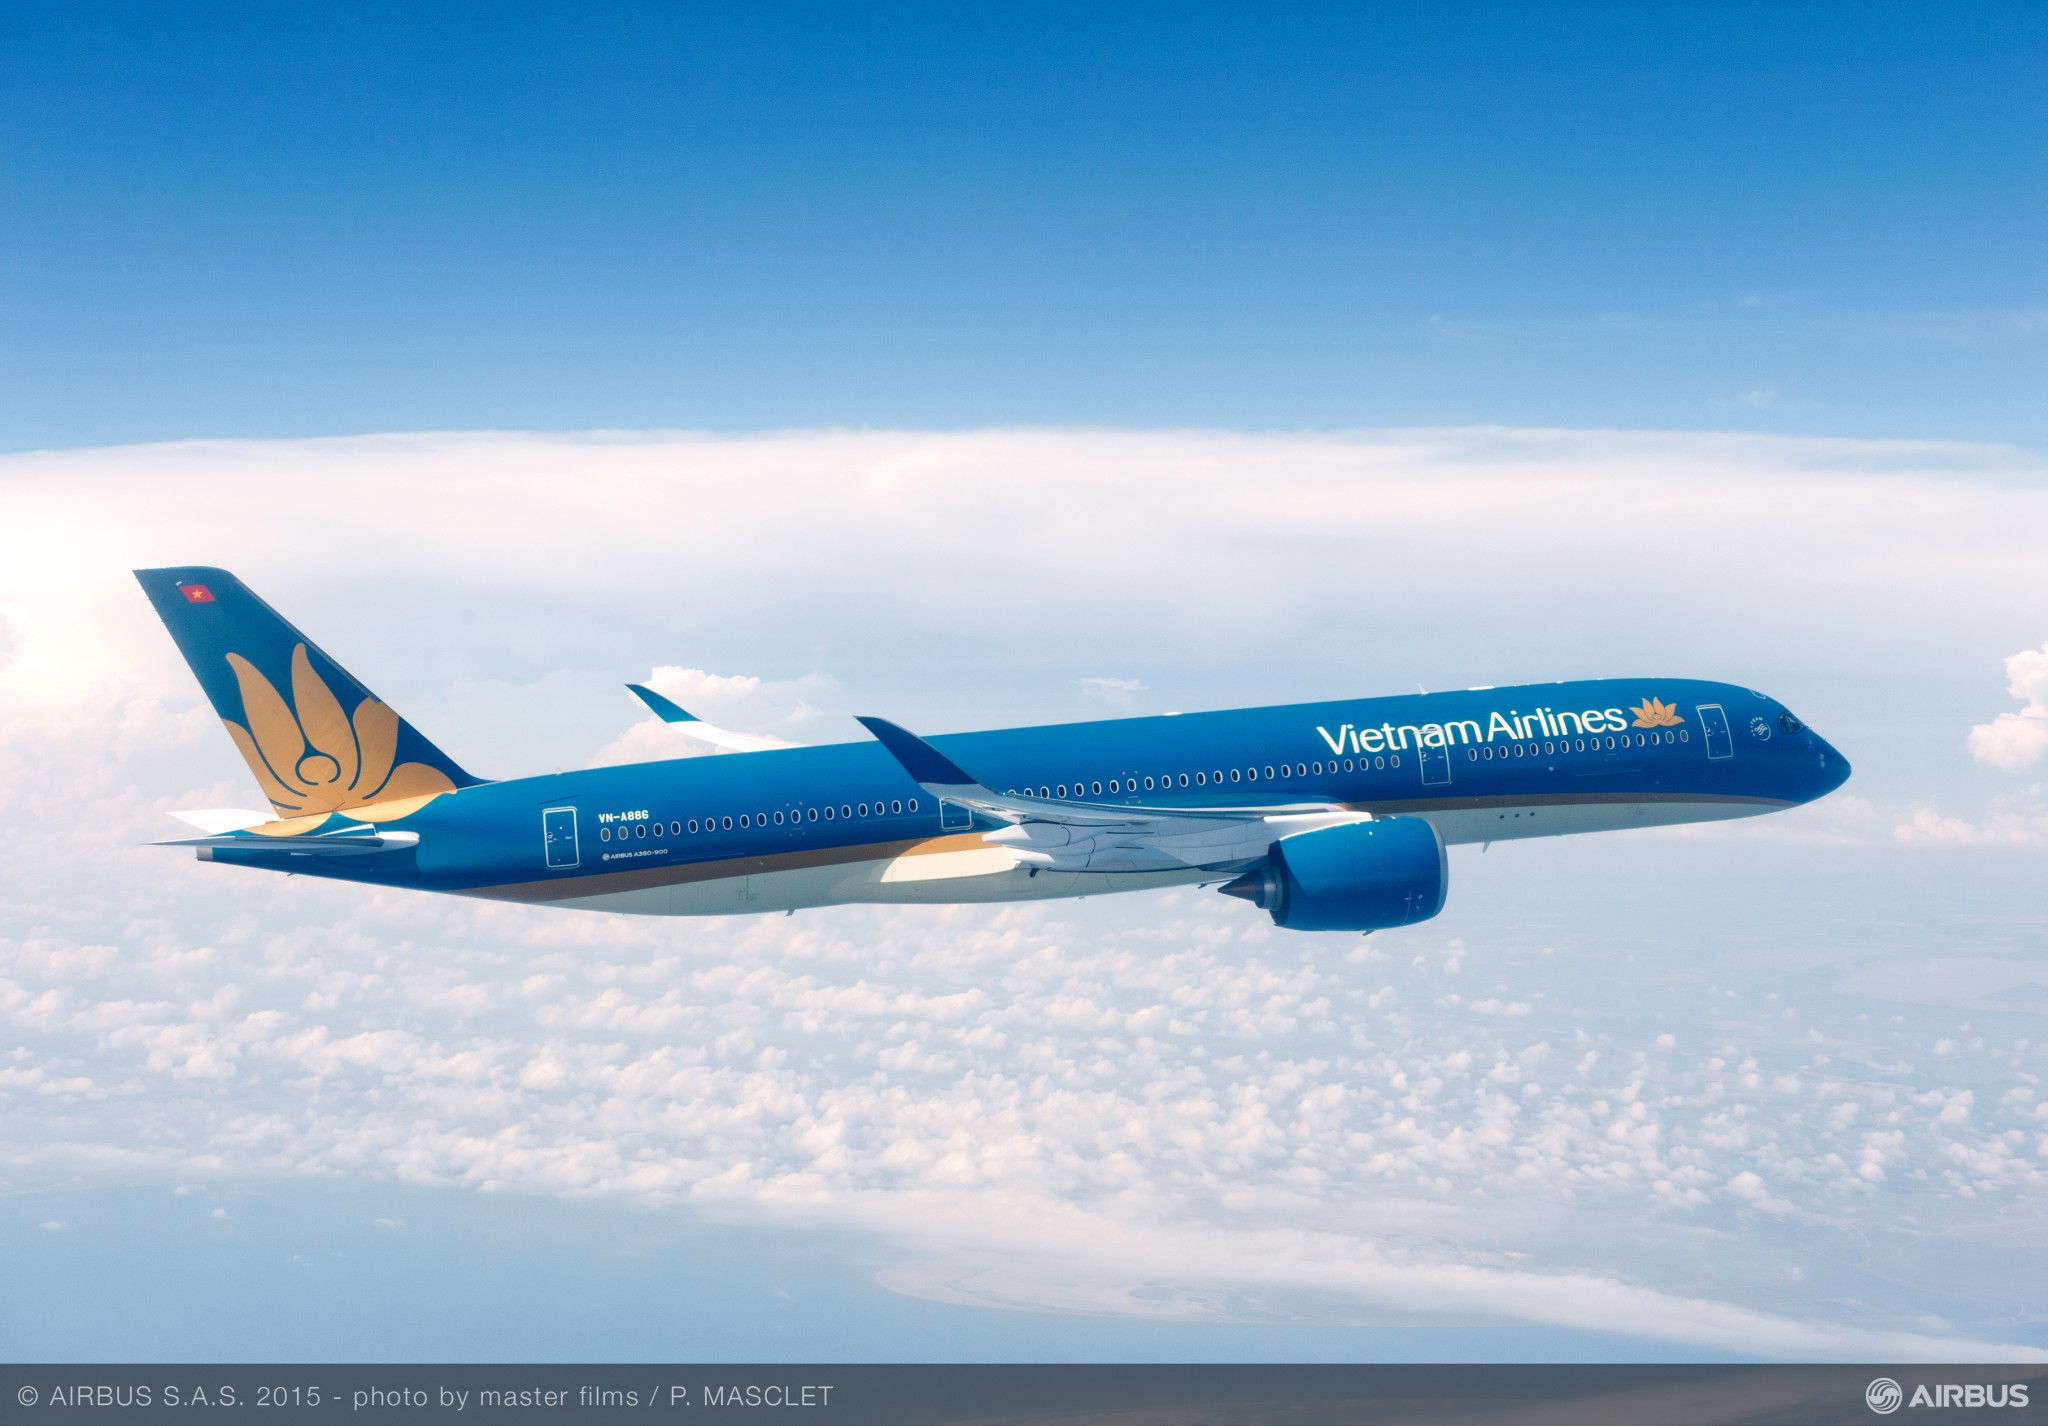 DVB finances one A350-900XWB on lease to Vietnam Airlines from DAE